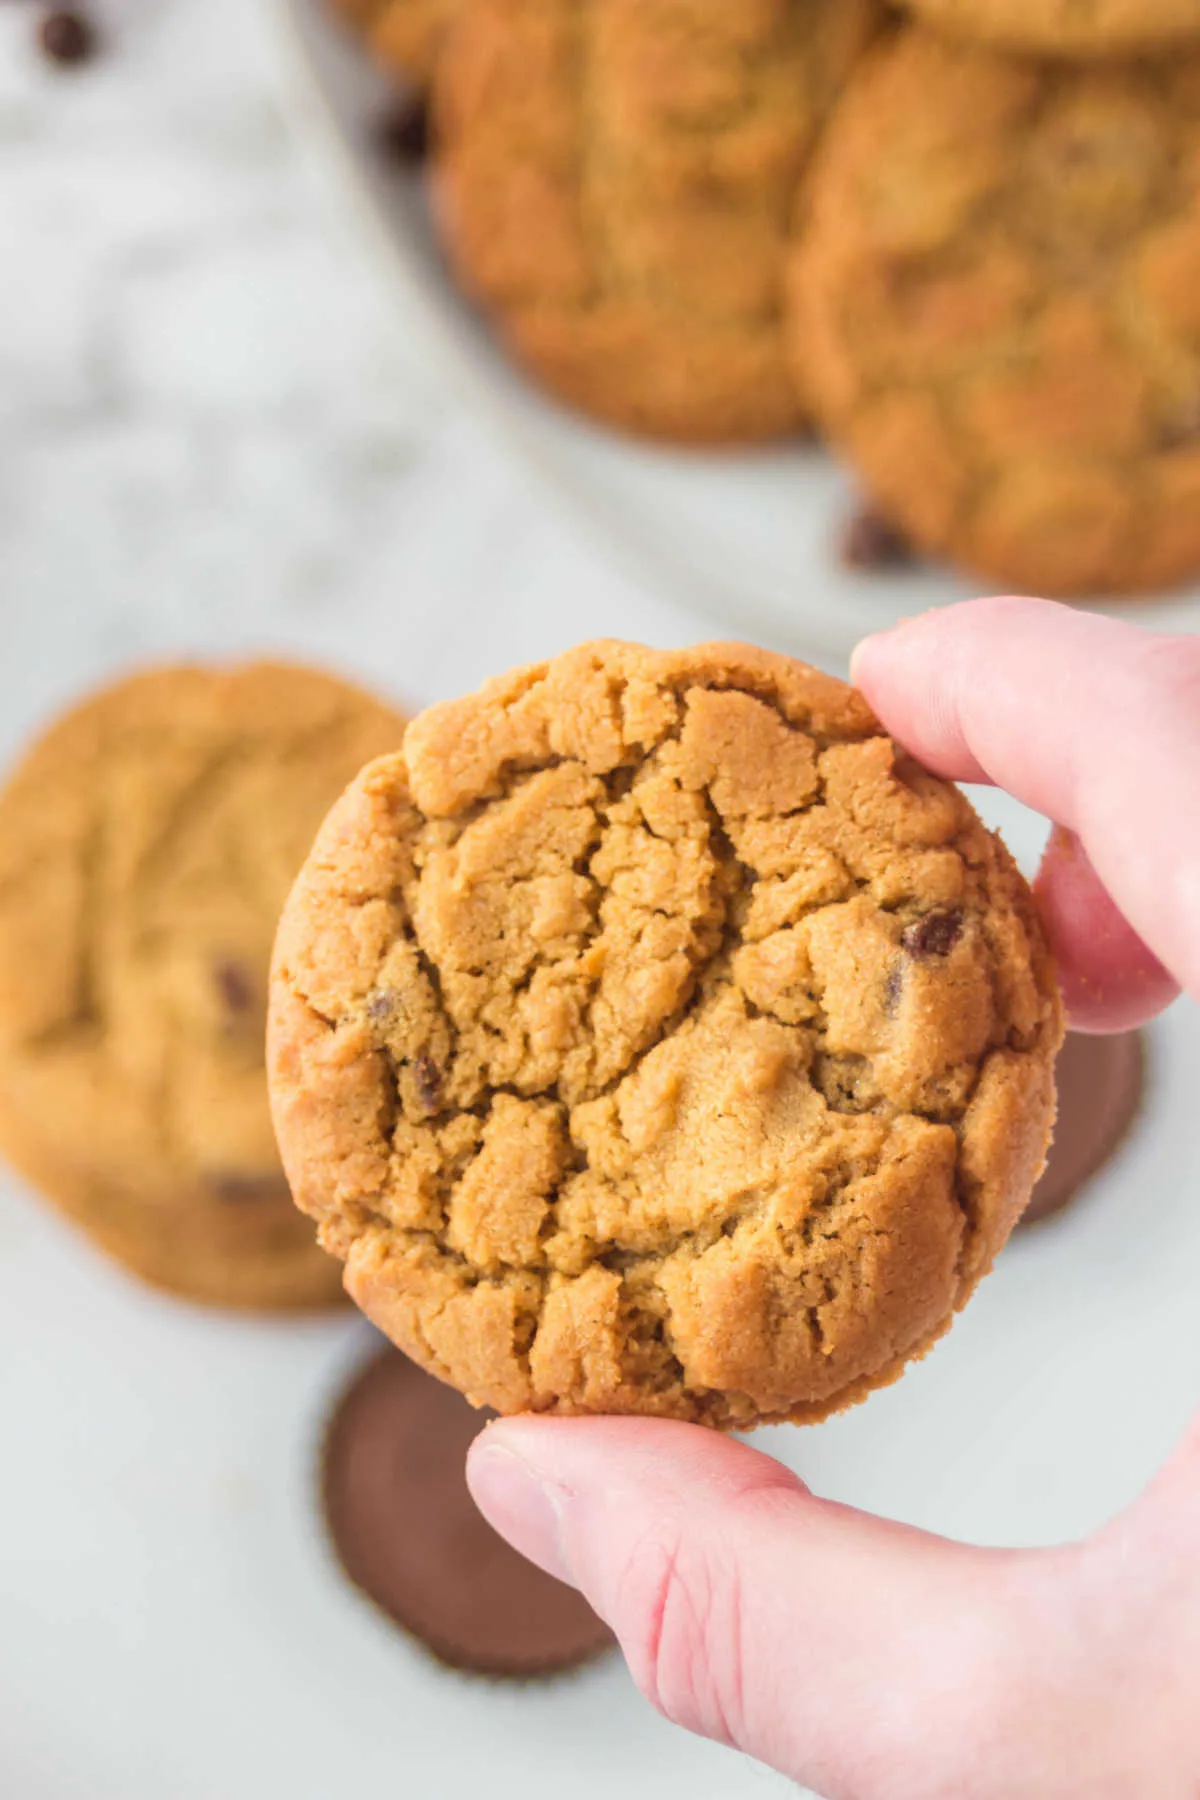 Hand holding chewy peanut butter cookies with chocolate chips.